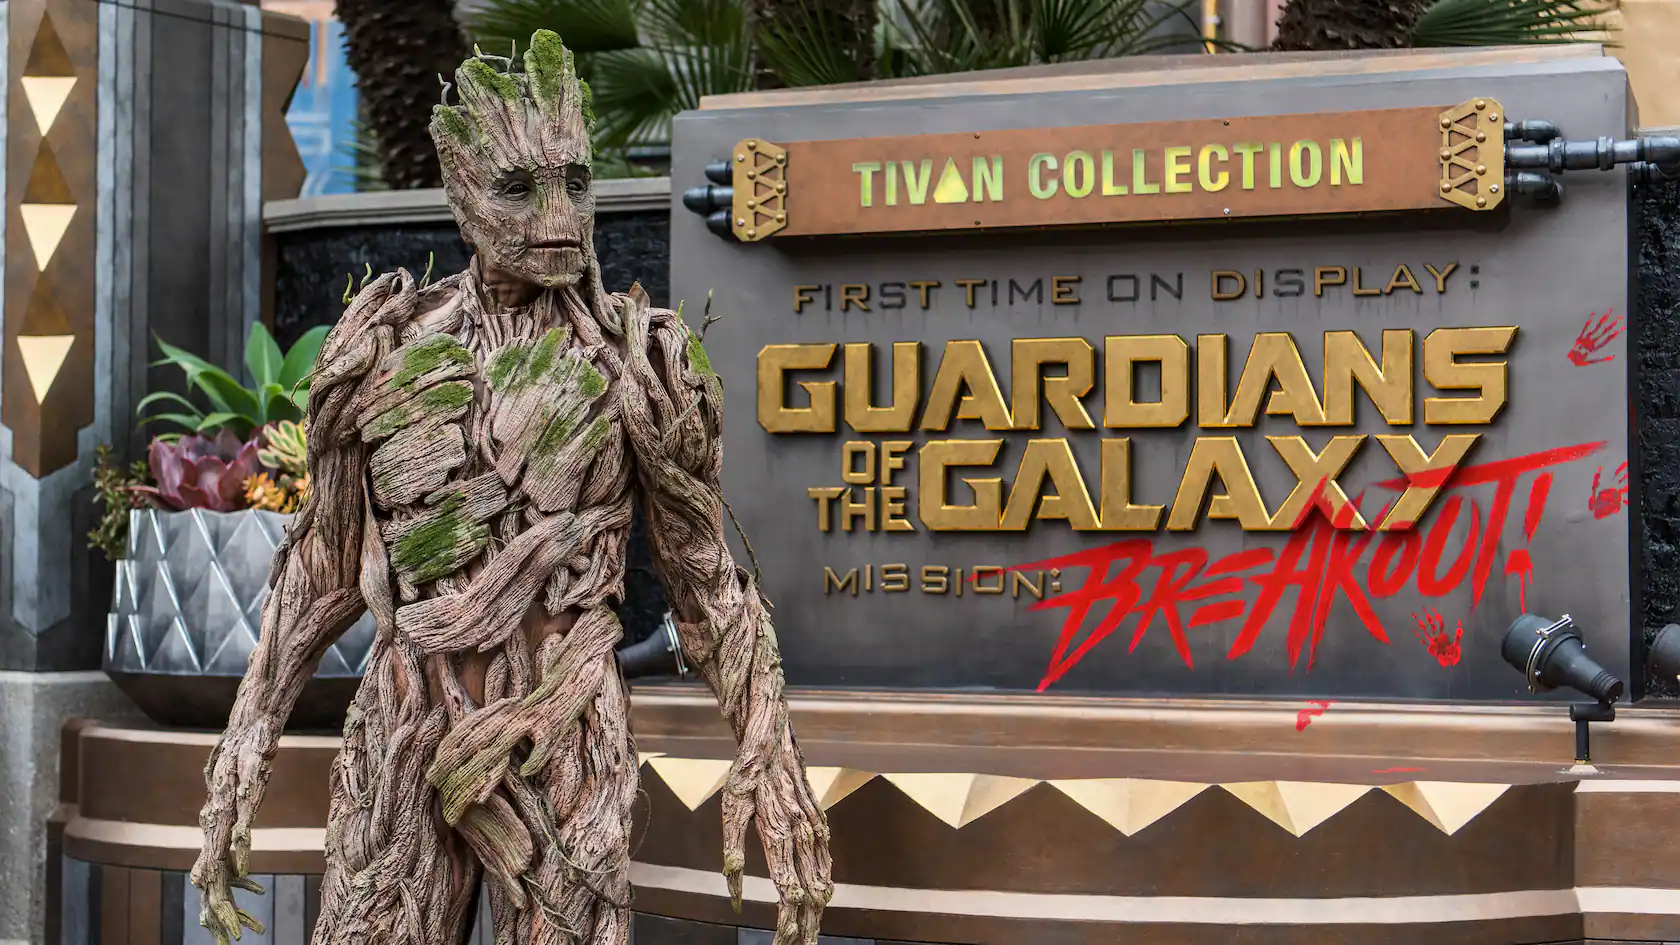 Guardians of the Galaxy mission break out, Disney